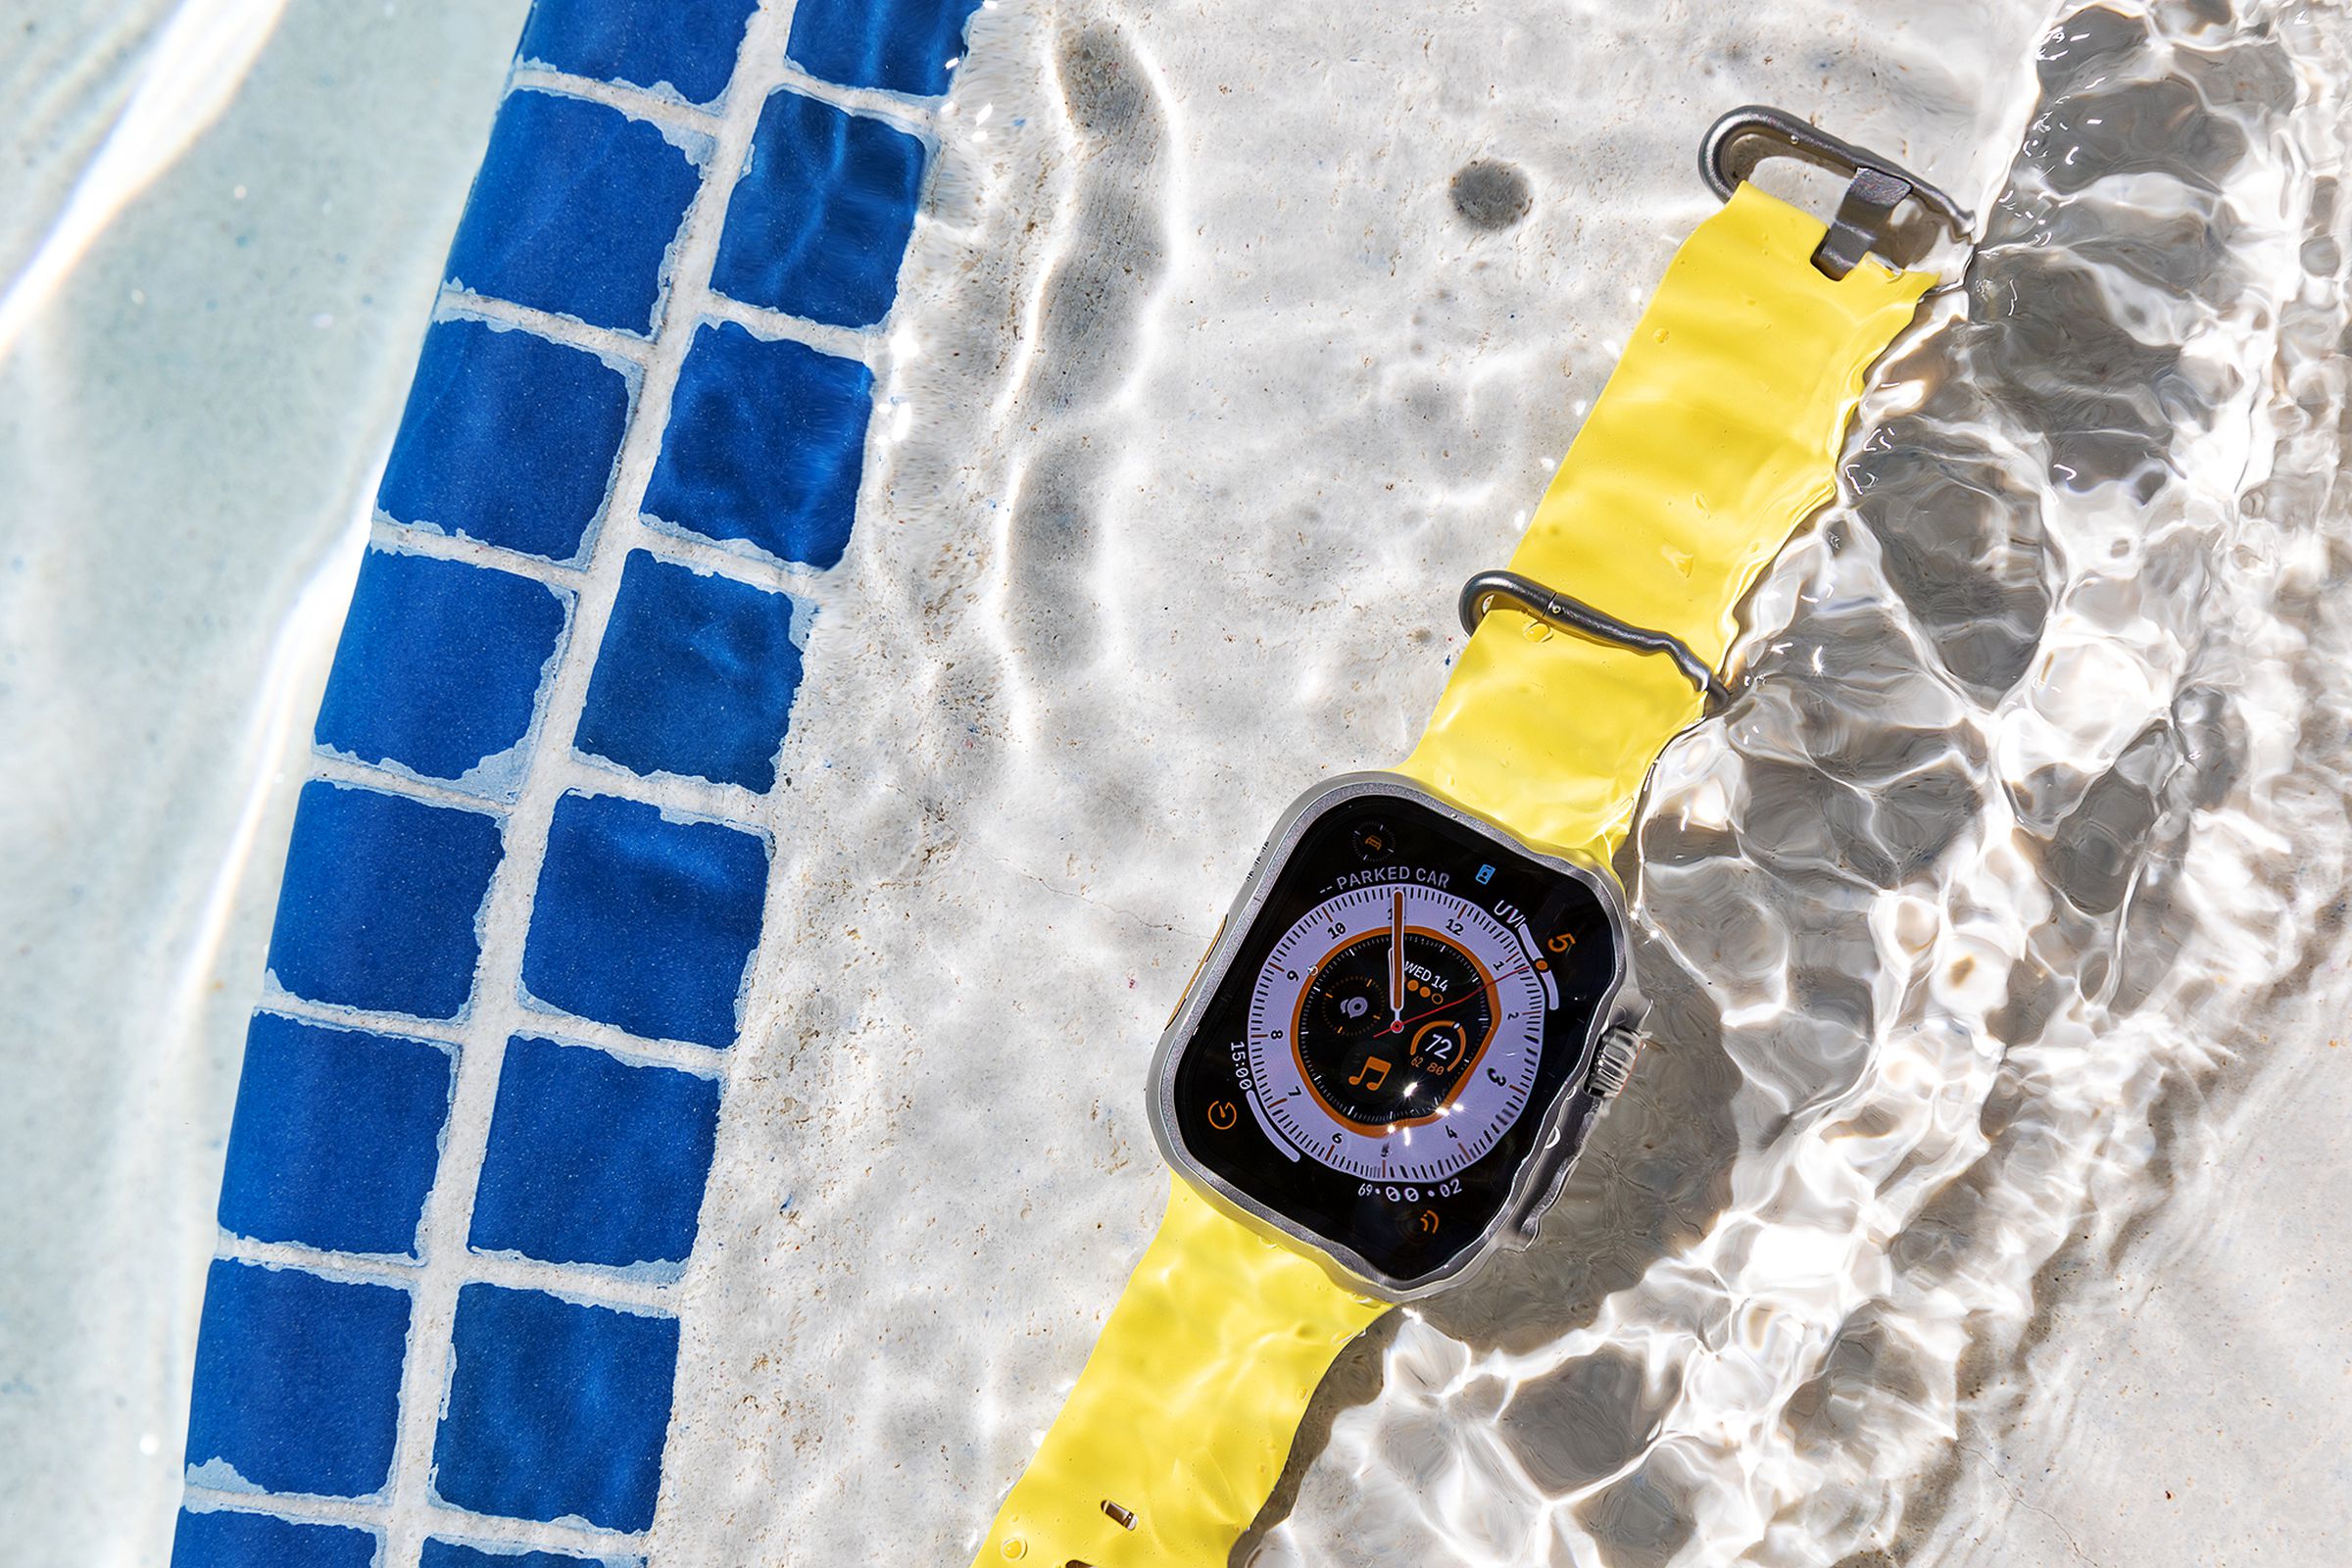 The Apple Watch Ultra returns to its all-time low price